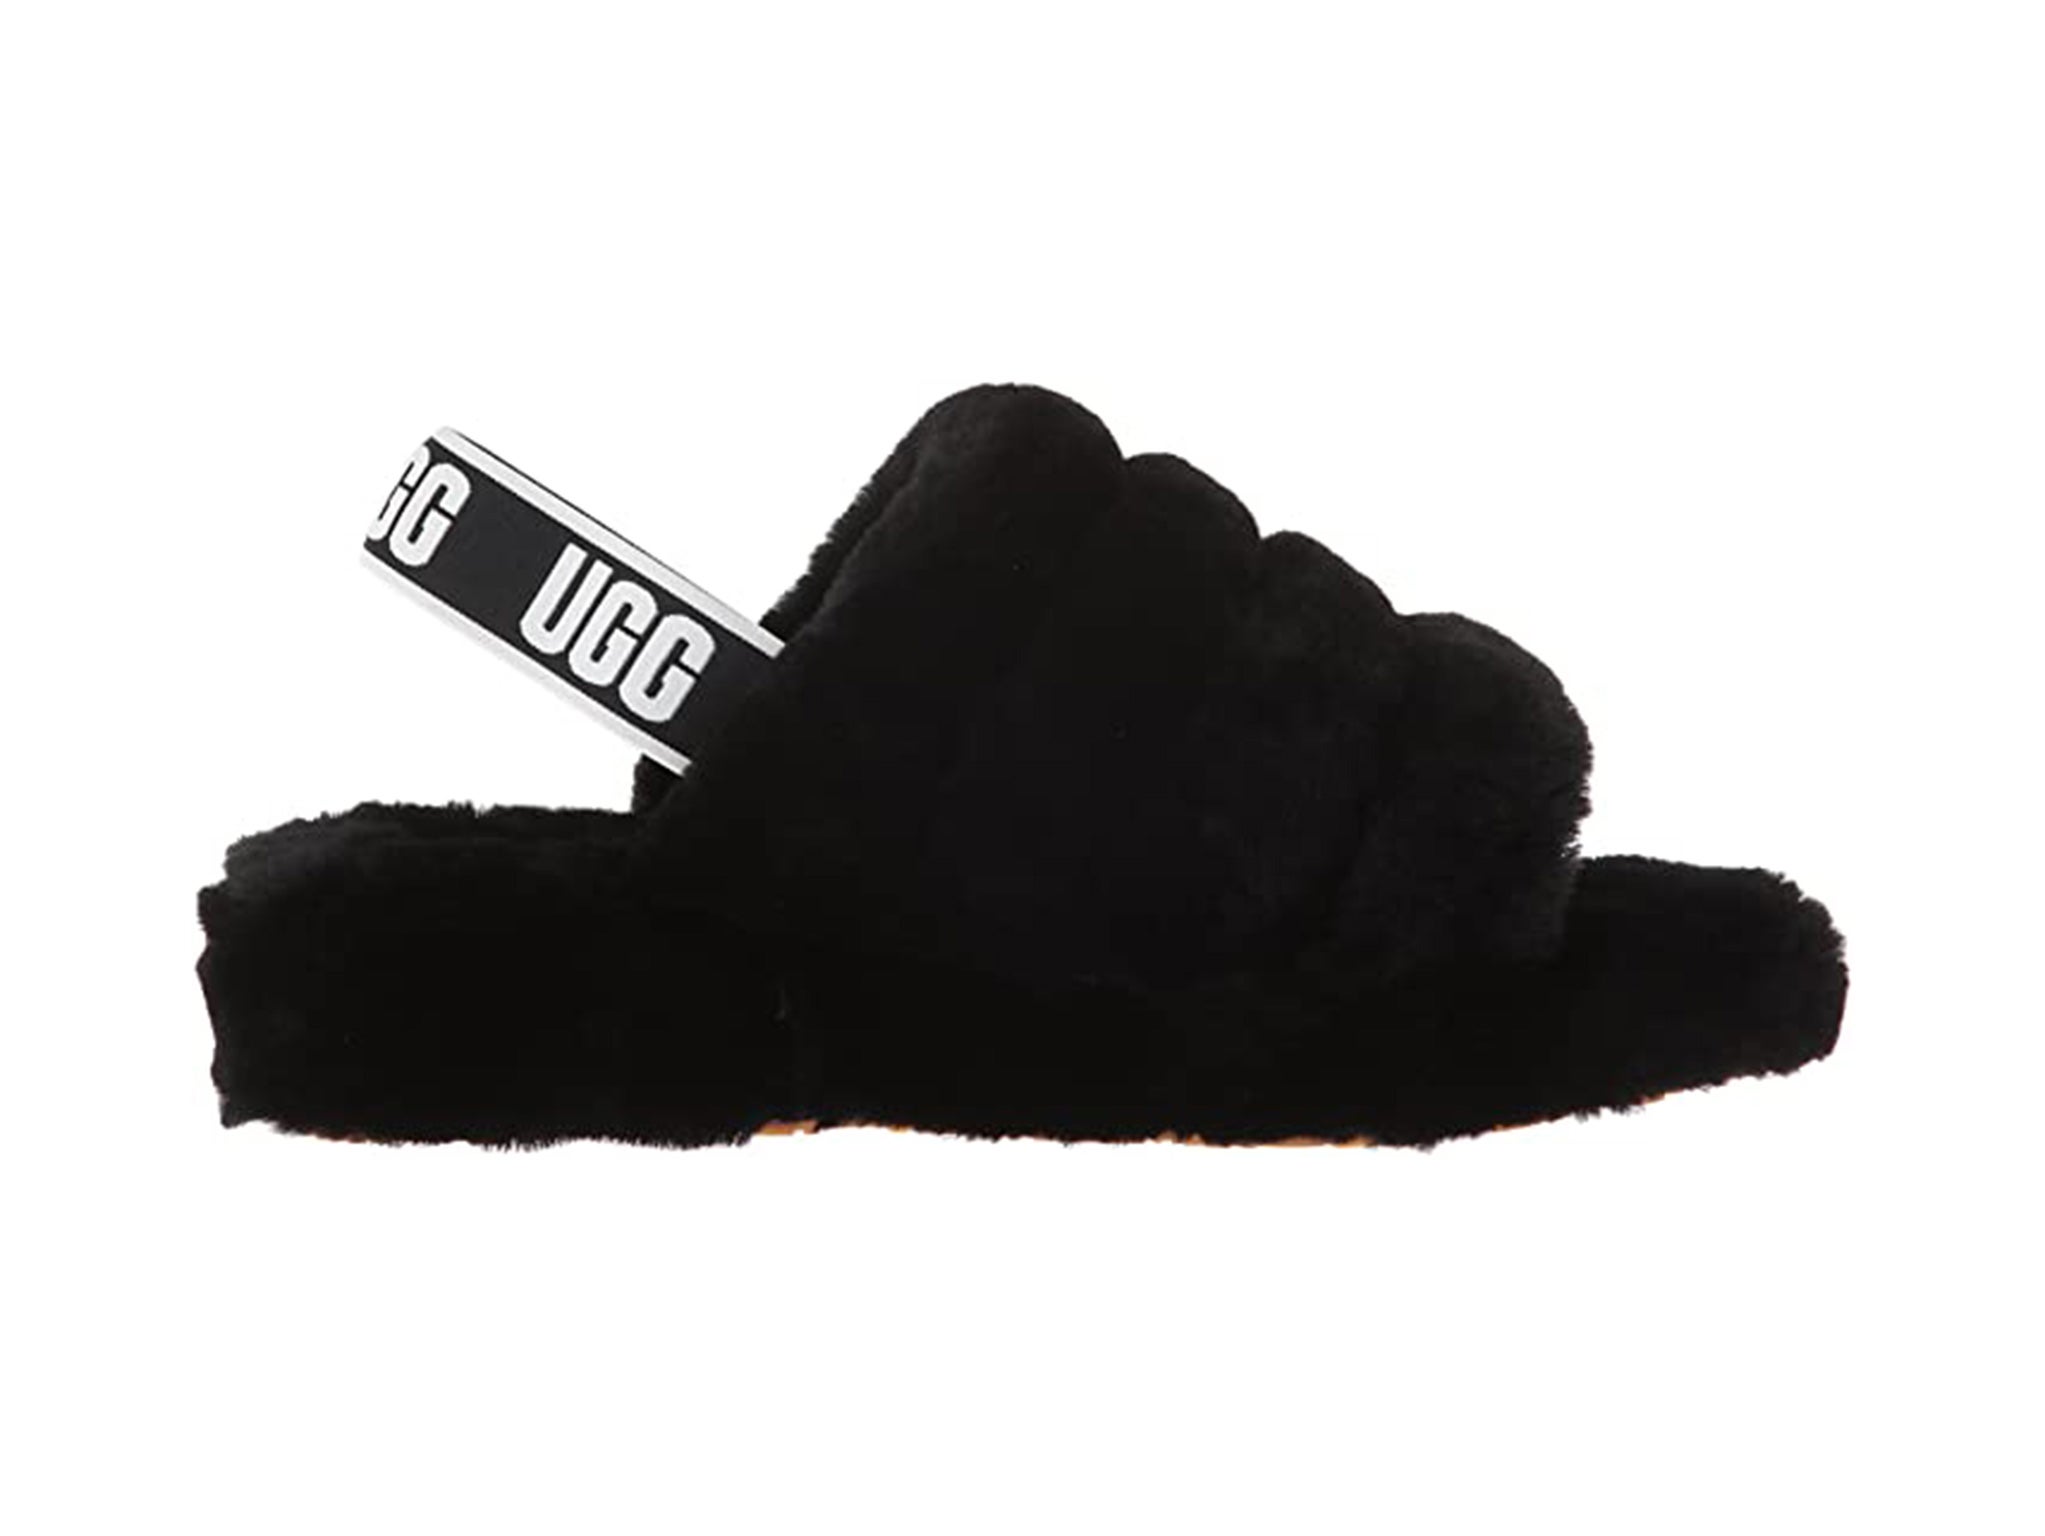 indybest-pandemic-purchases-ugg-slippers.jpg